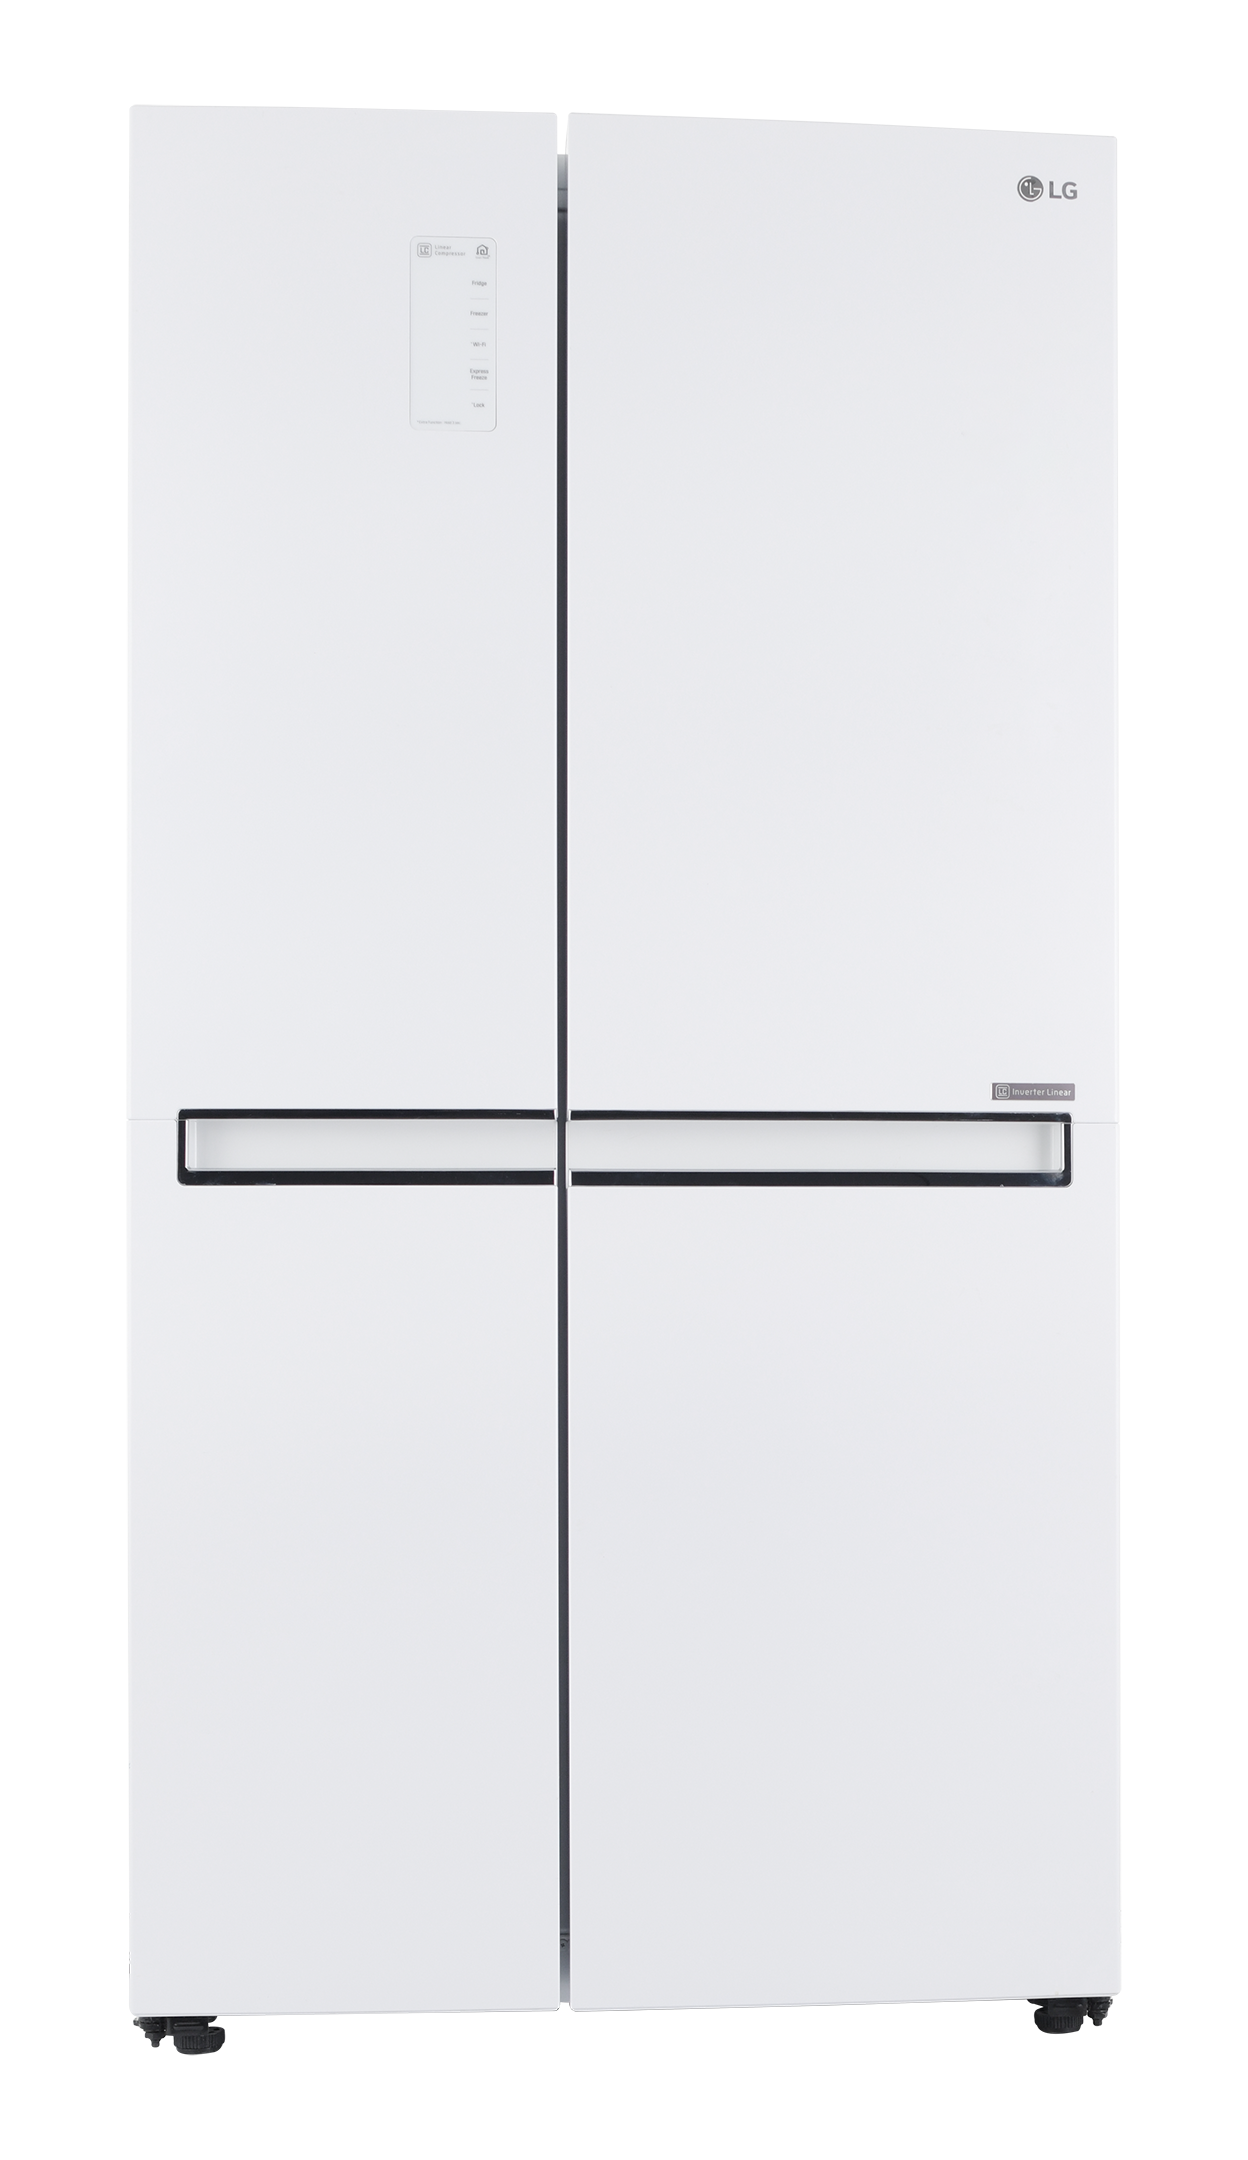 Buy LG Side by Side Refrigerator, 22.1 Cu.ft, LINEAR Cooling, White in Saudi Arabia